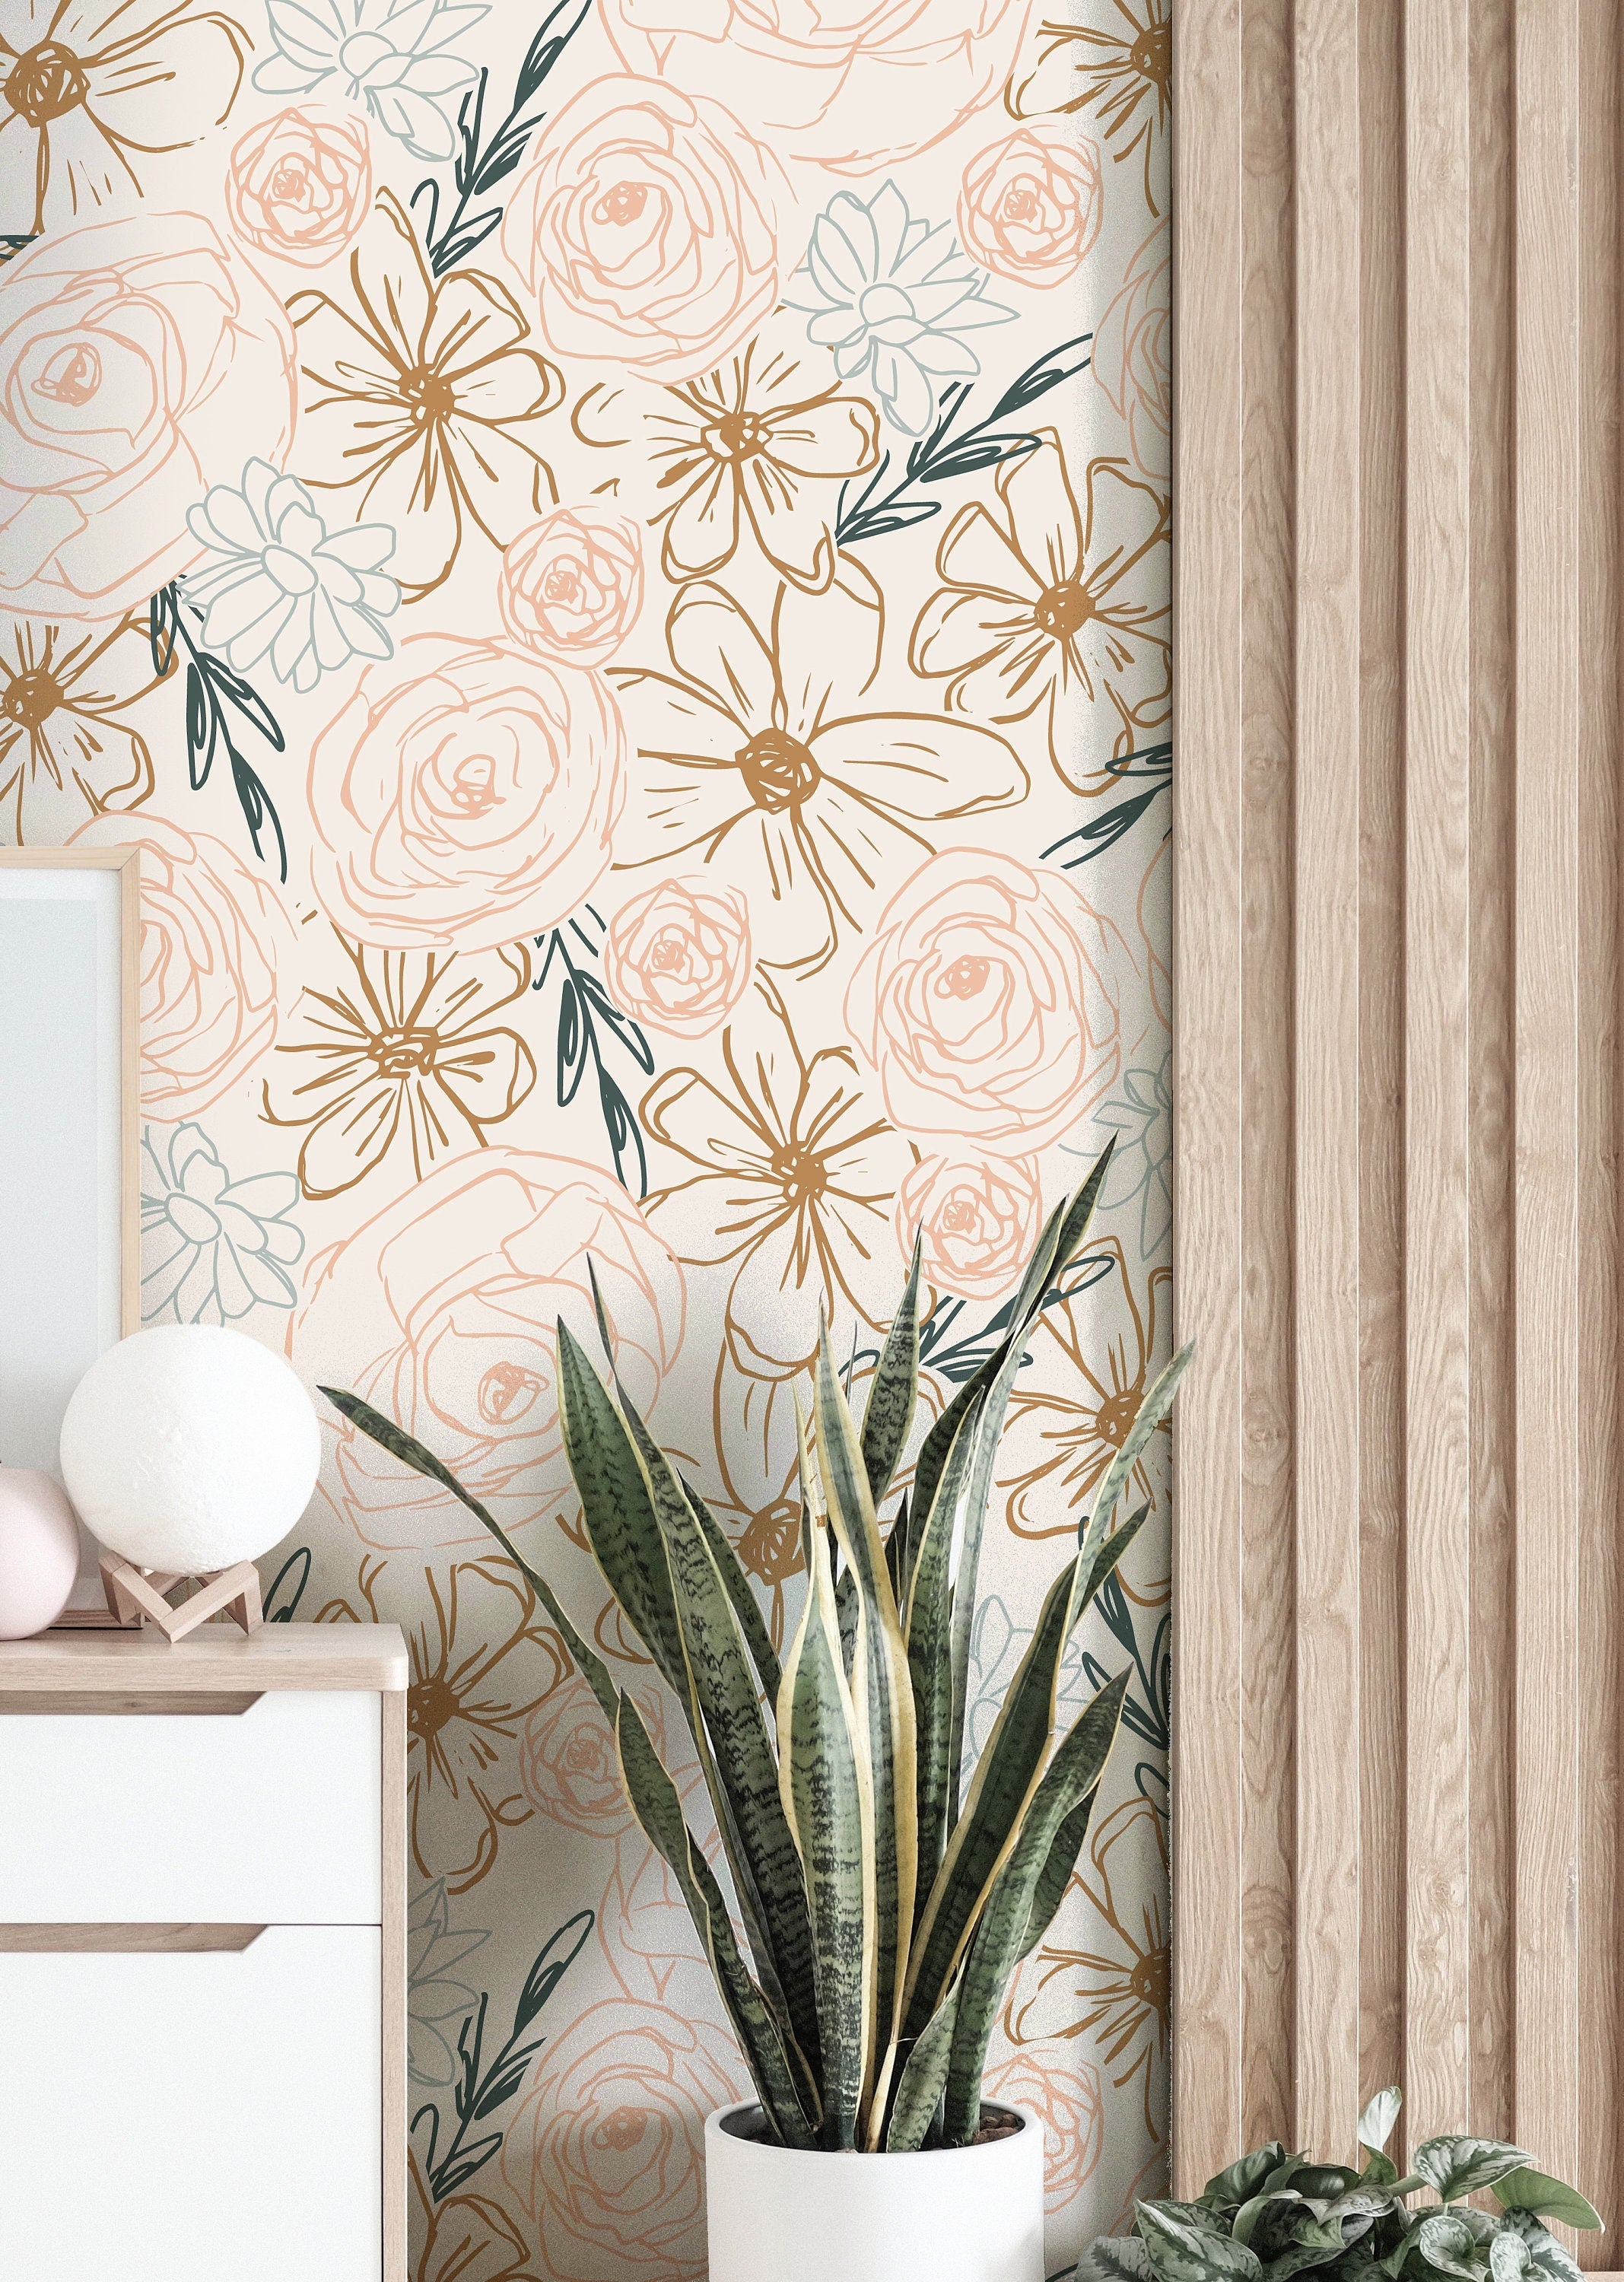 Boho Wall Decal Peel and Stick Wall Decor Floral Wall Decor 